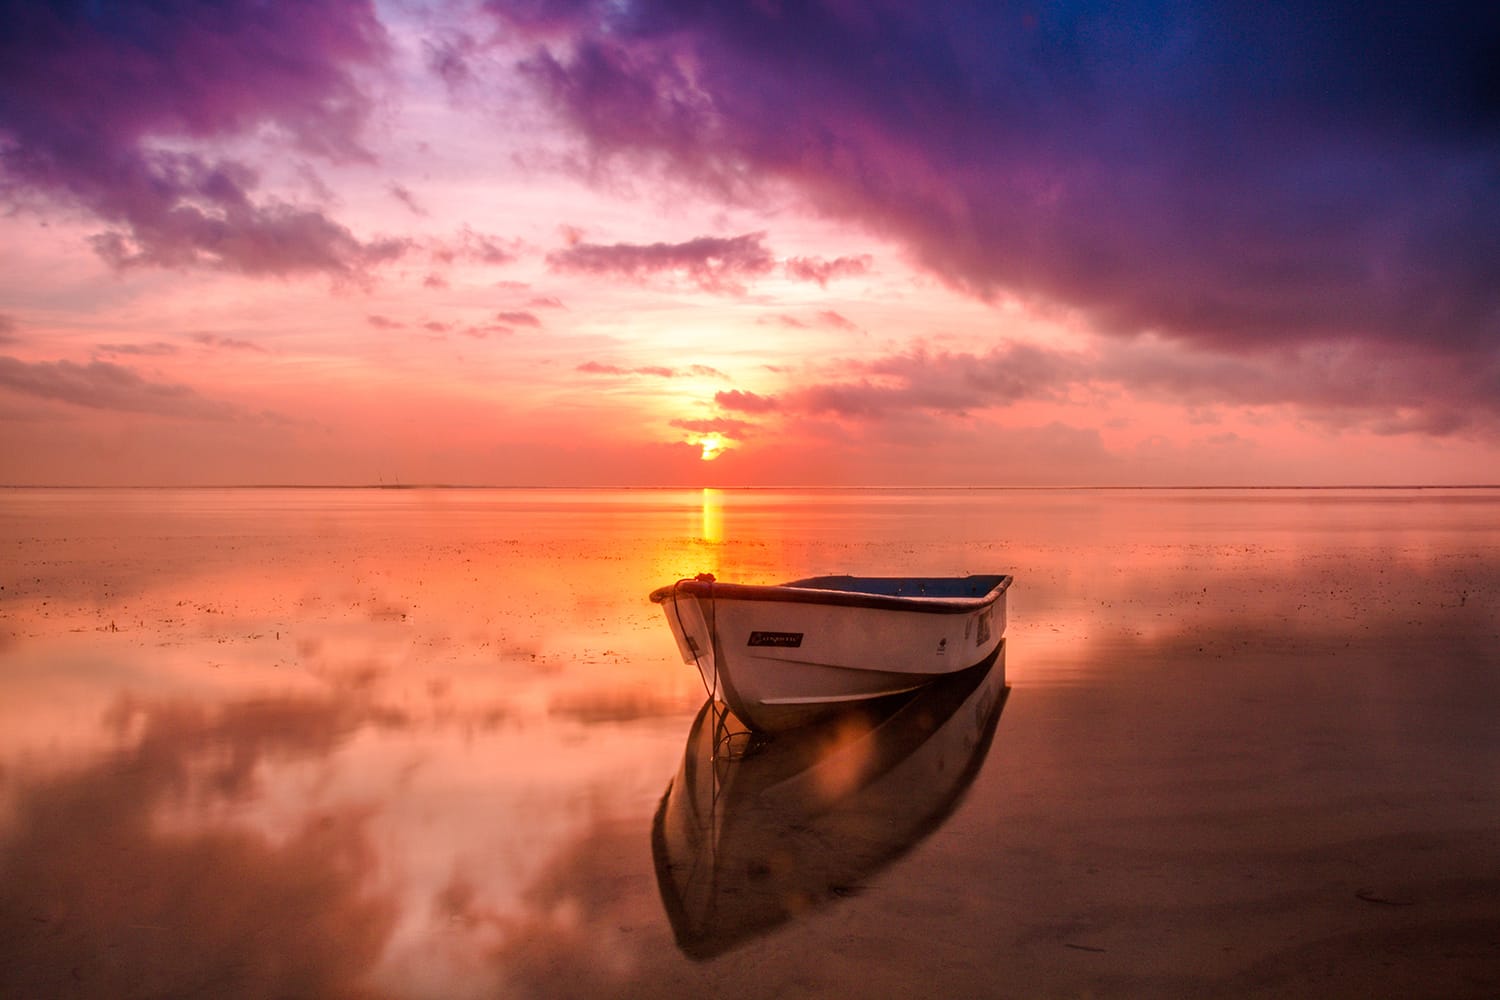 7 Super Useful Tips For Shooting Breathtaking Sunset Photos You’ll Be